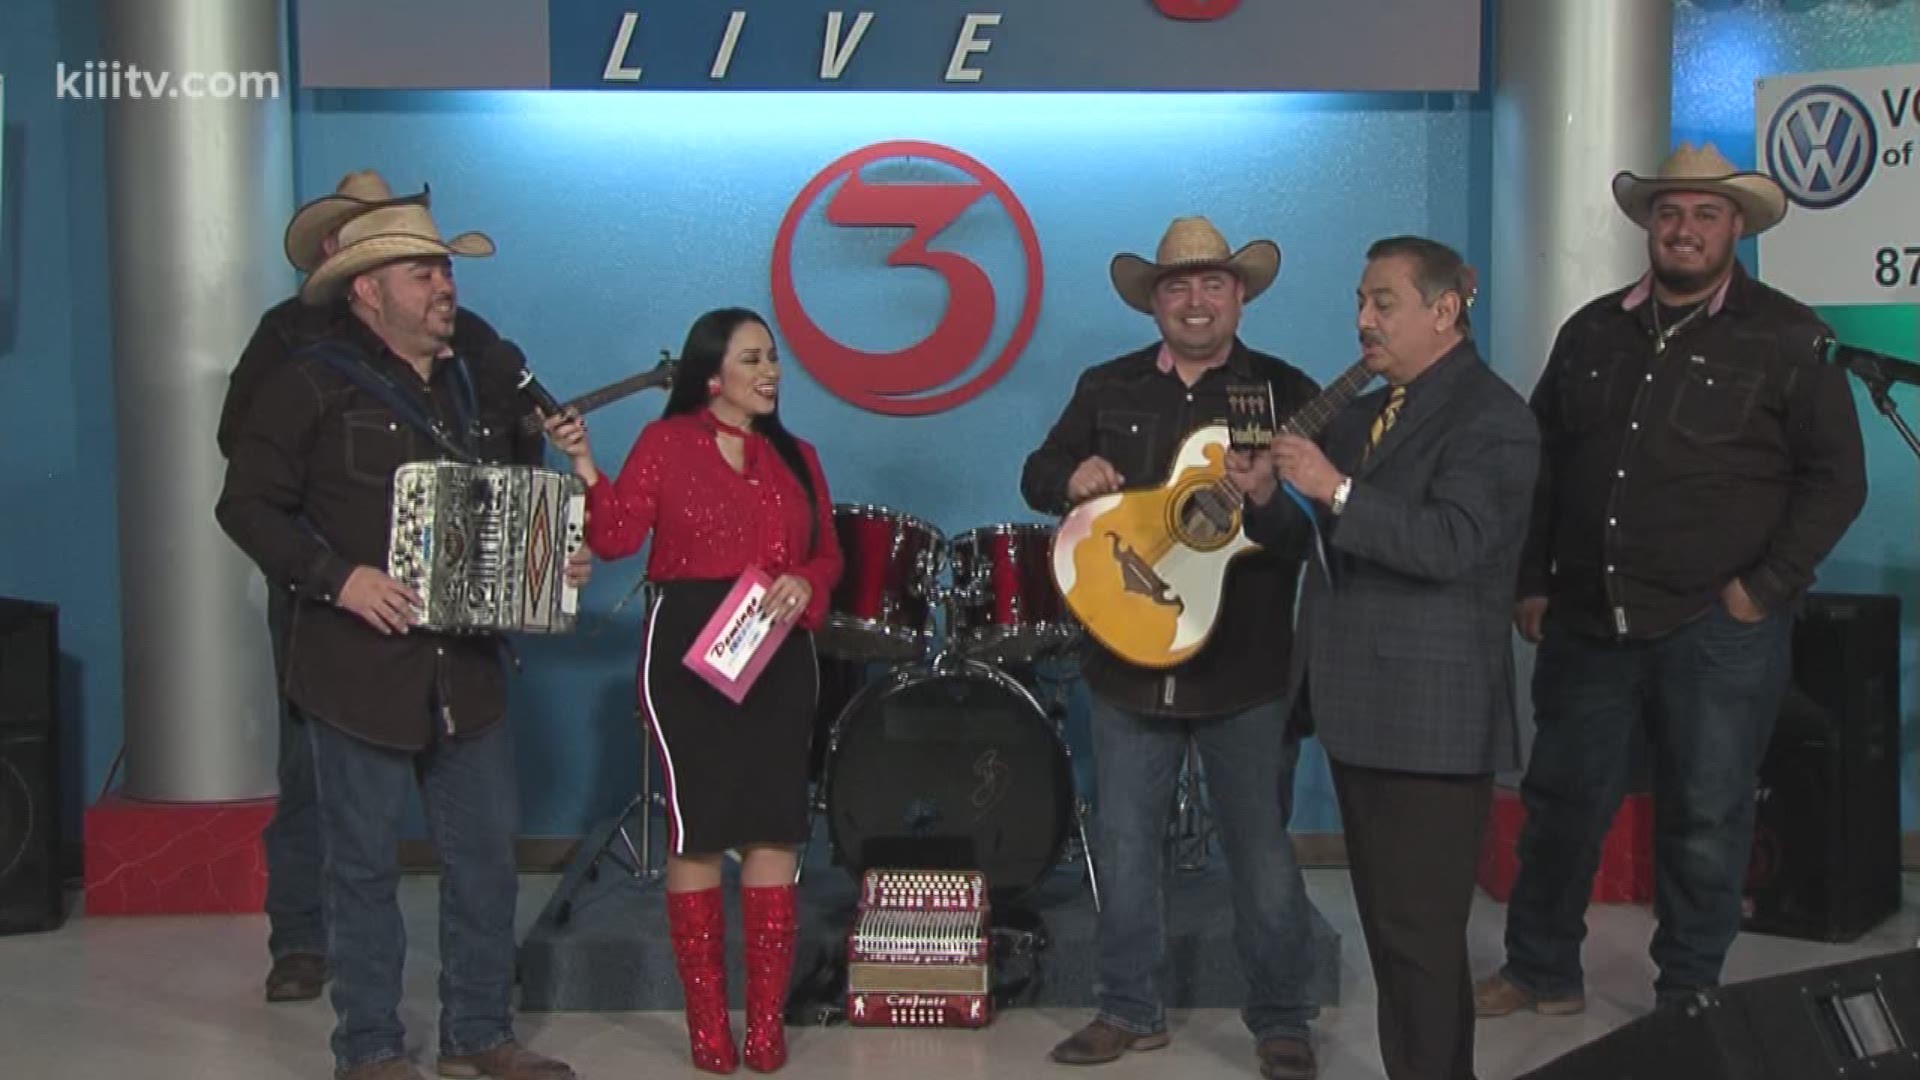 Rudy Trevino and Barbi Leo Interview Tejano Boys on Domingo Live. This Brownsville, Texas band briefly discuss the humble beginning of their band and hope their latest music will be released at the end of March 2019. Be sure to follow Tejano Boys on all social media platforms and support this amazing local talent we have here in South Texas.